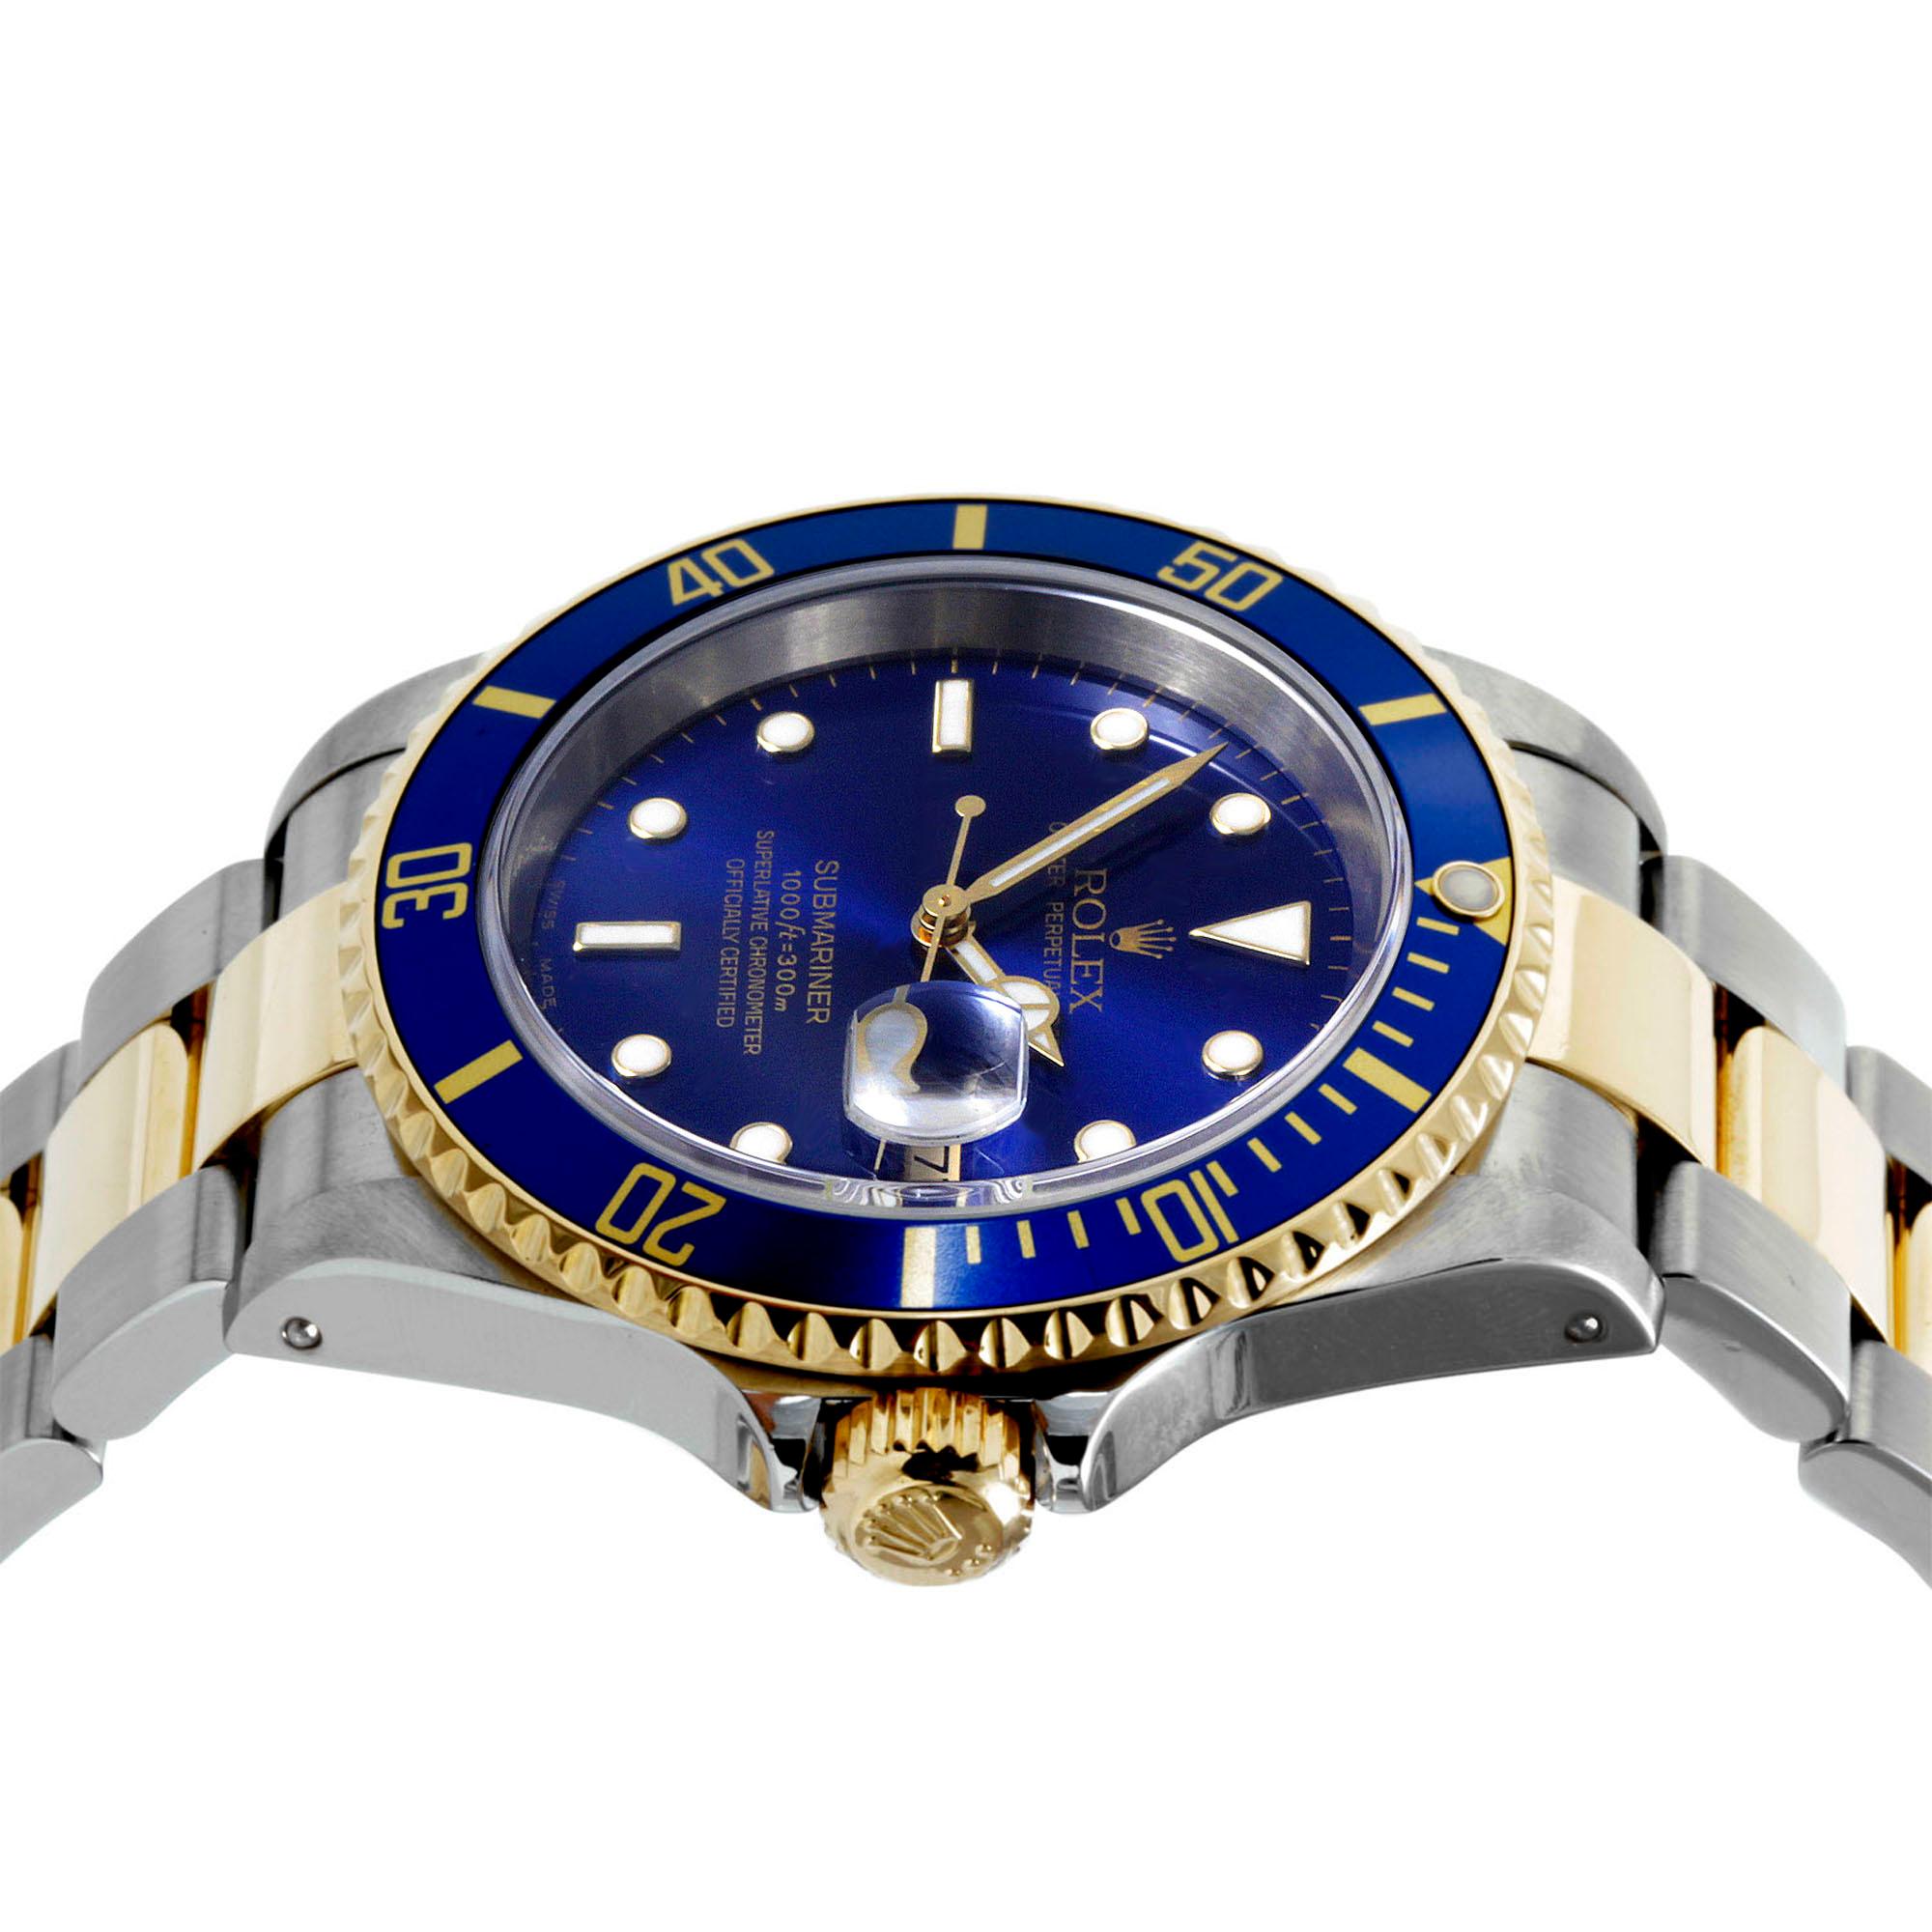 (WATCH DESCRIPTION)
Model - 16613/Submariner
Gender - Mens 
Case size - 40mm
Metals - stee/Yellow gold
Dial - Blue Sub Dial
Wrist band - two-tone Oyster
Movement - Automatic Cal-3135
Bezel - sport rotating 
Wrist size - 7 1/2 plus divers extension 
